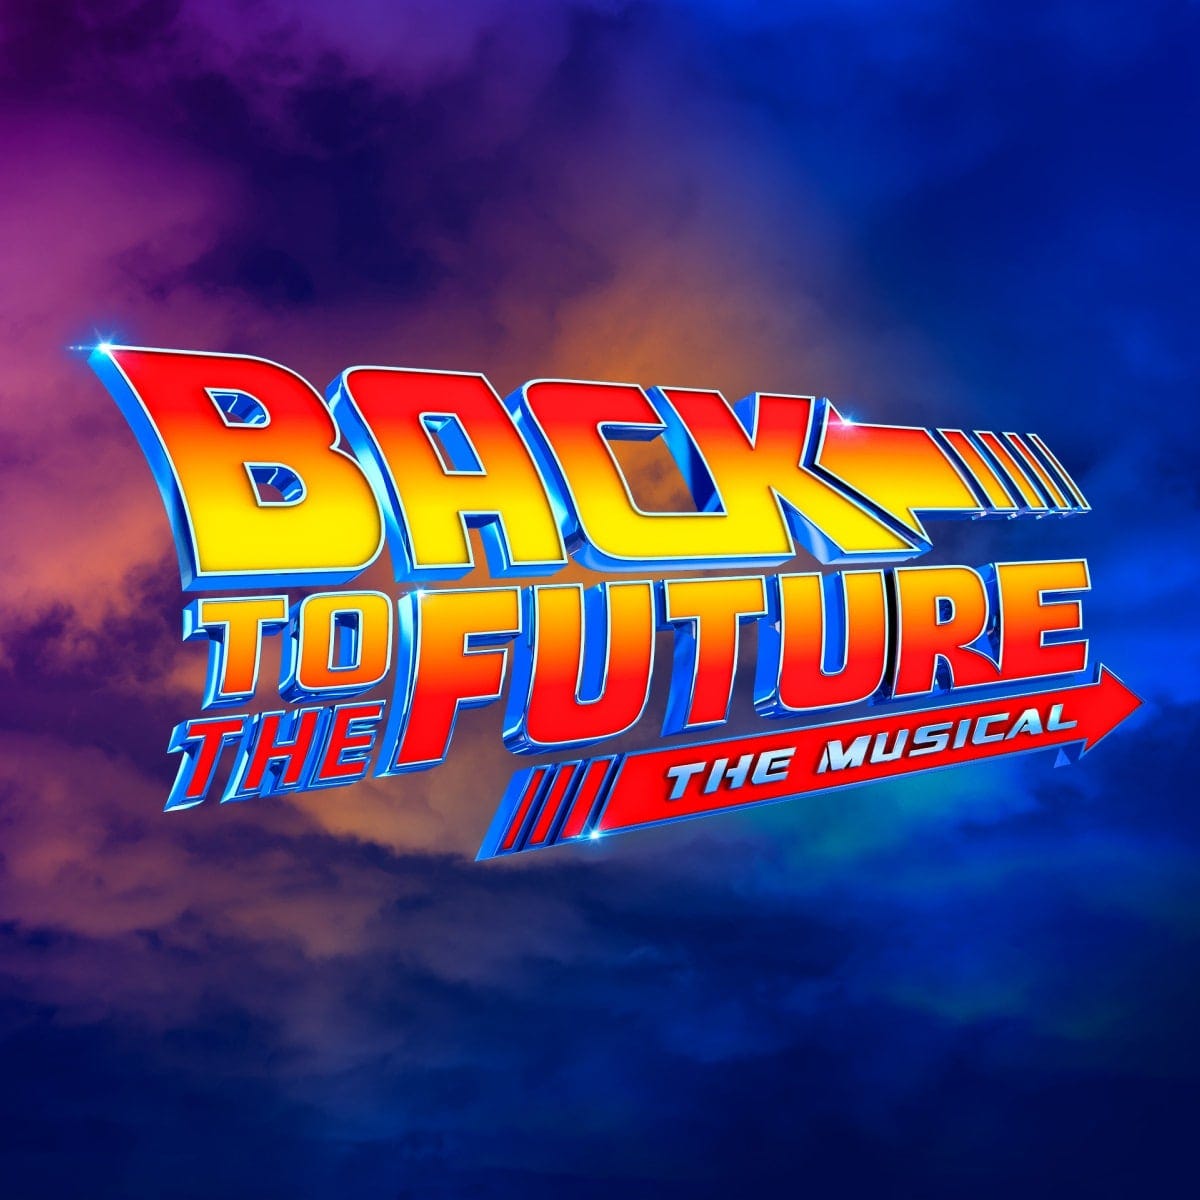 Back to the Future The Musical | The Official Website